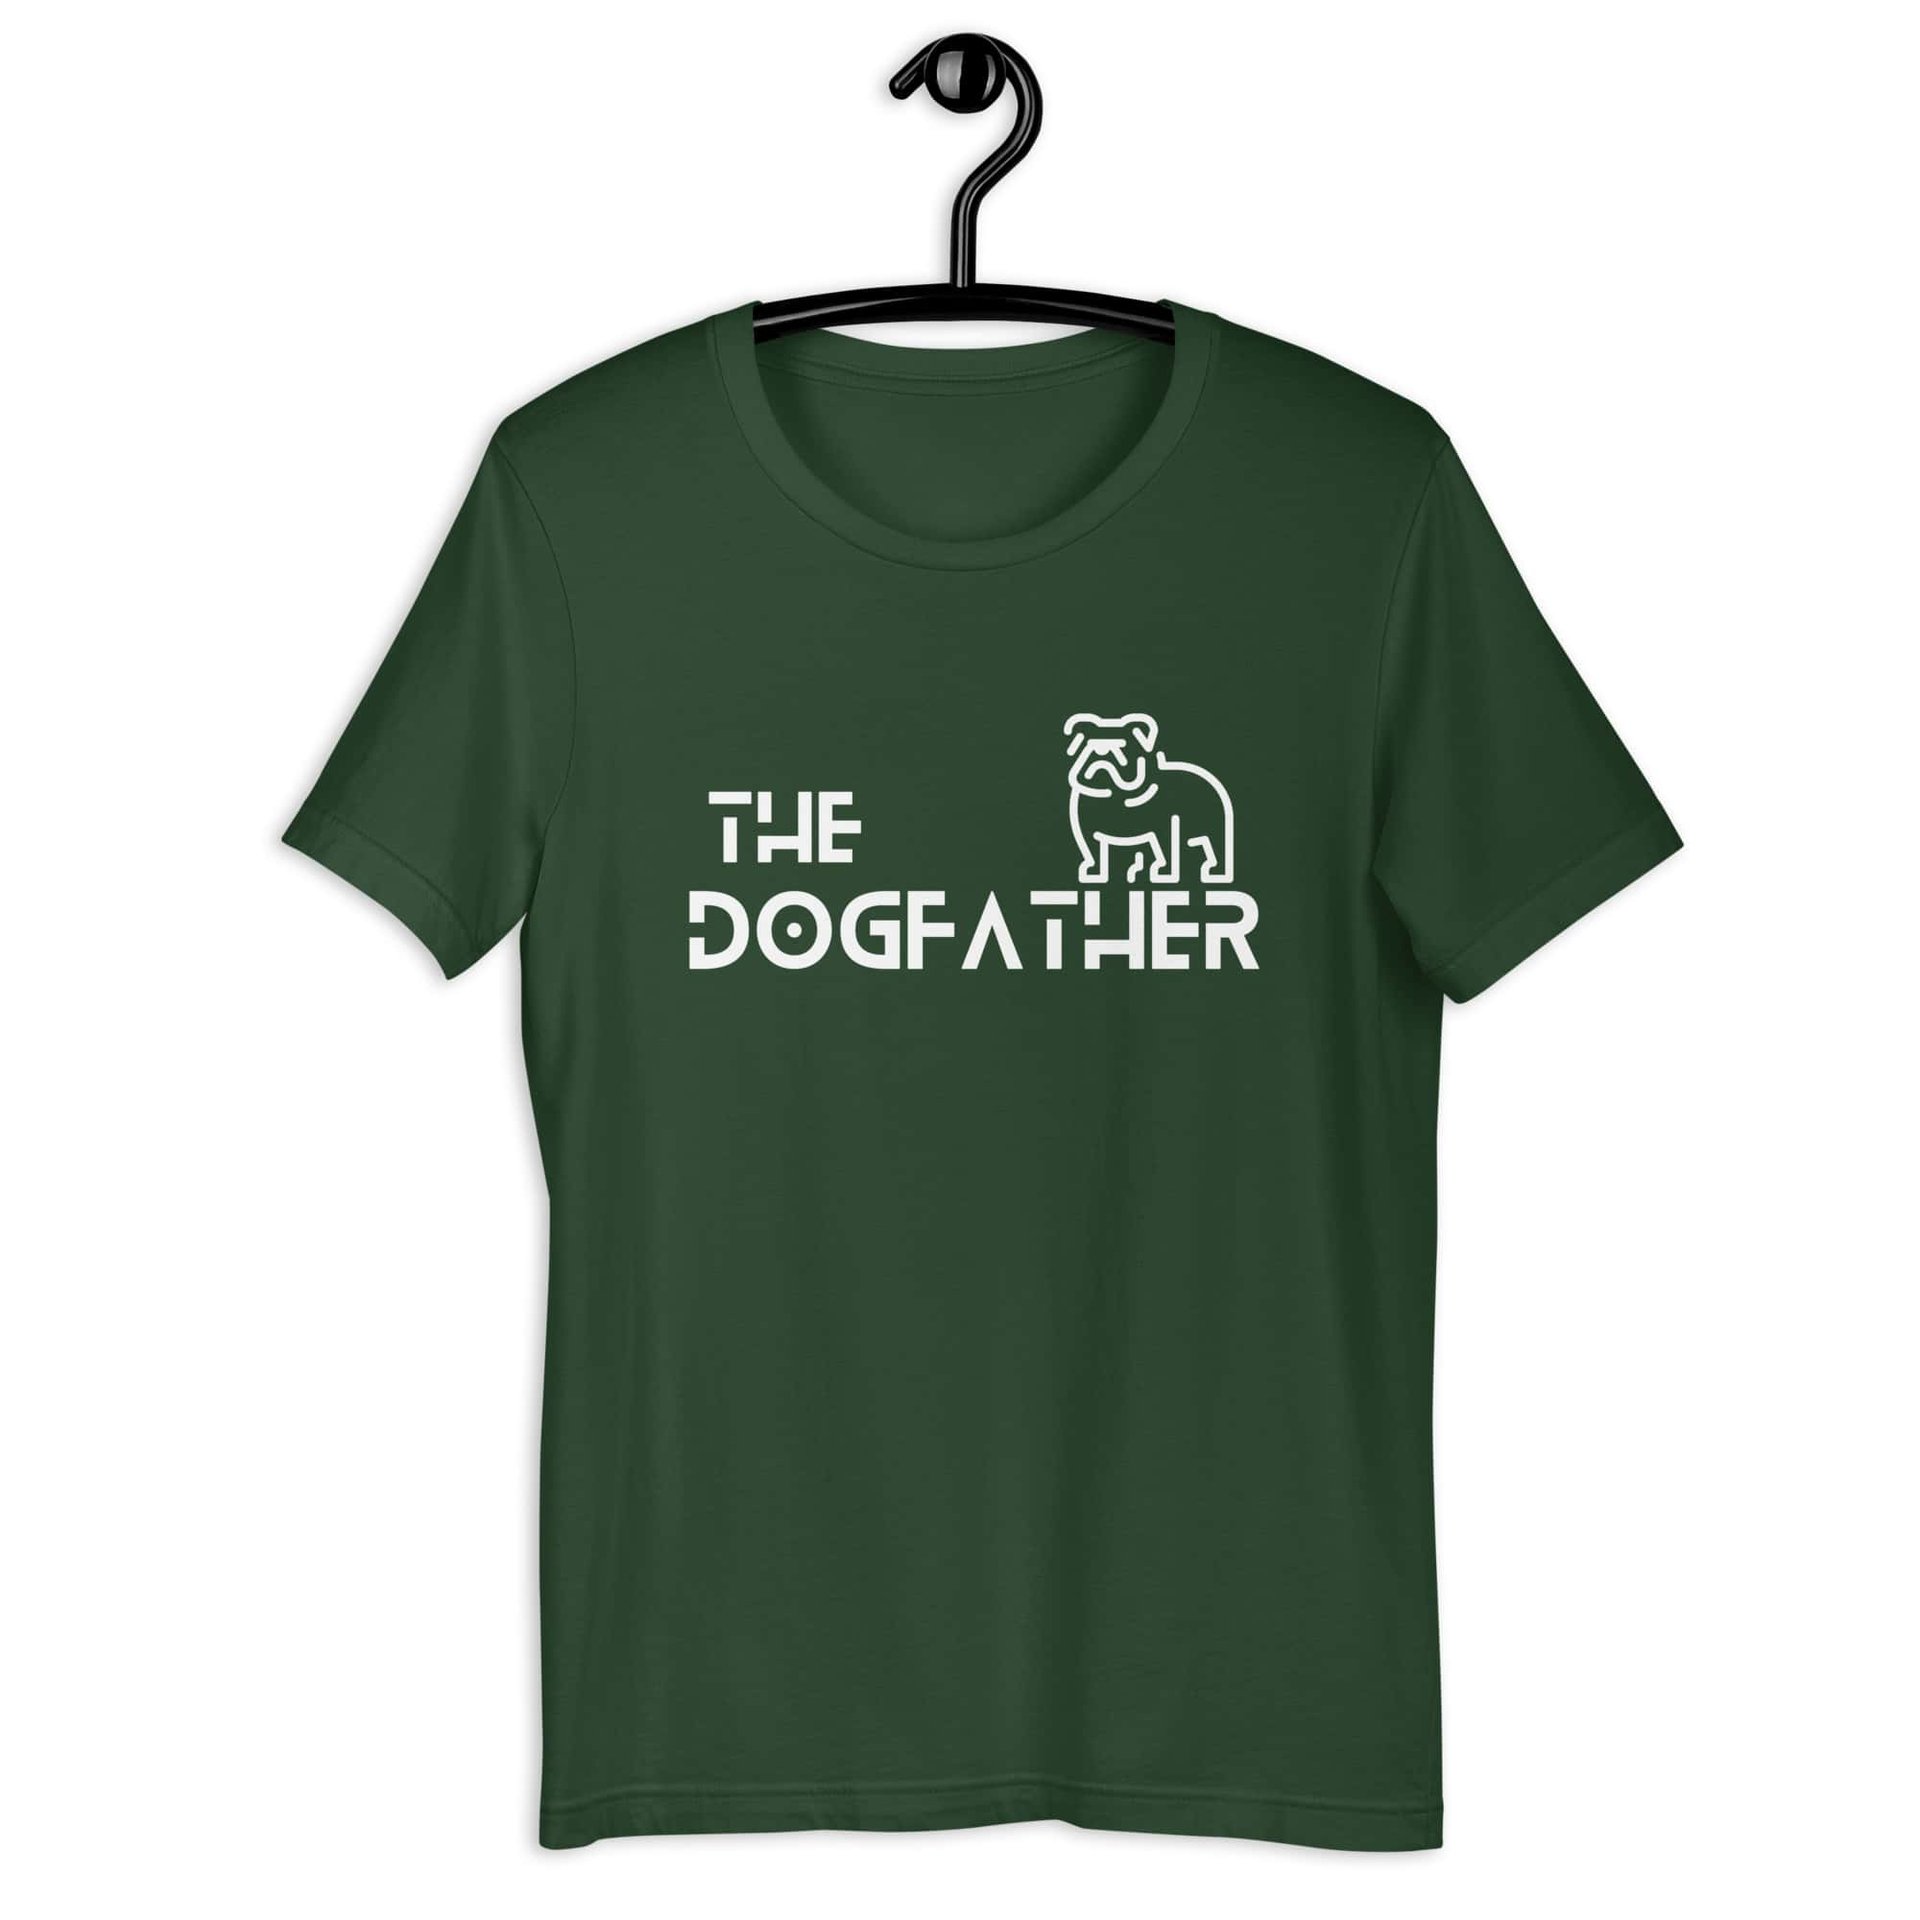 The Dogfather Bulldog Unisex T-Shirt. Forest